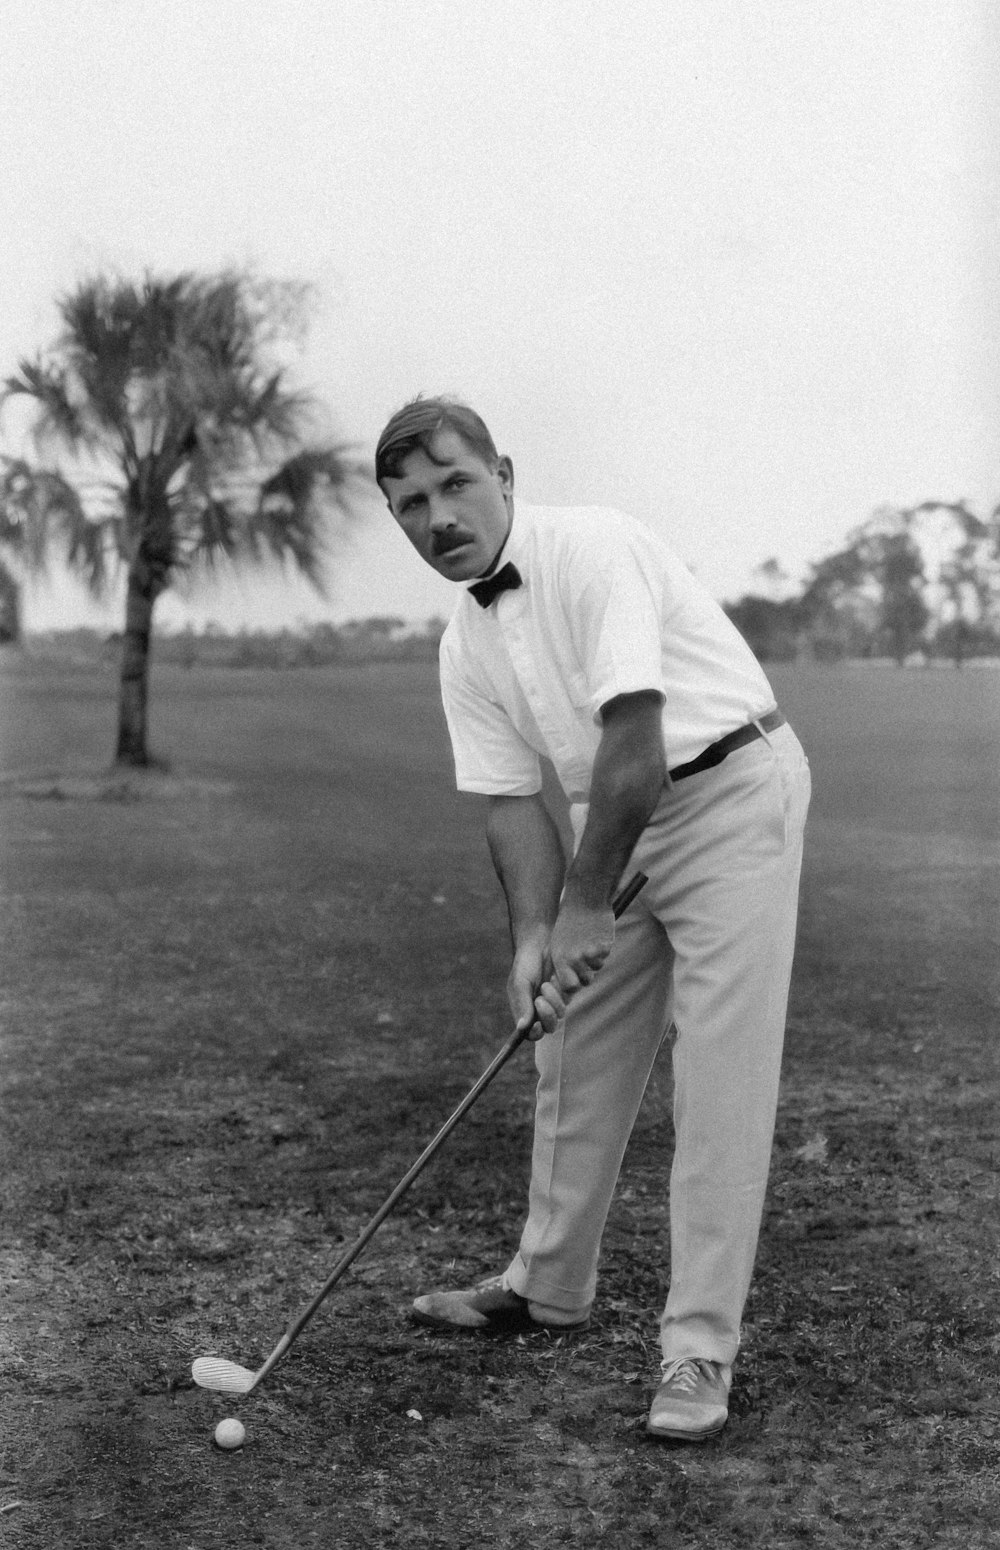 a black and white photo of a man playing golf